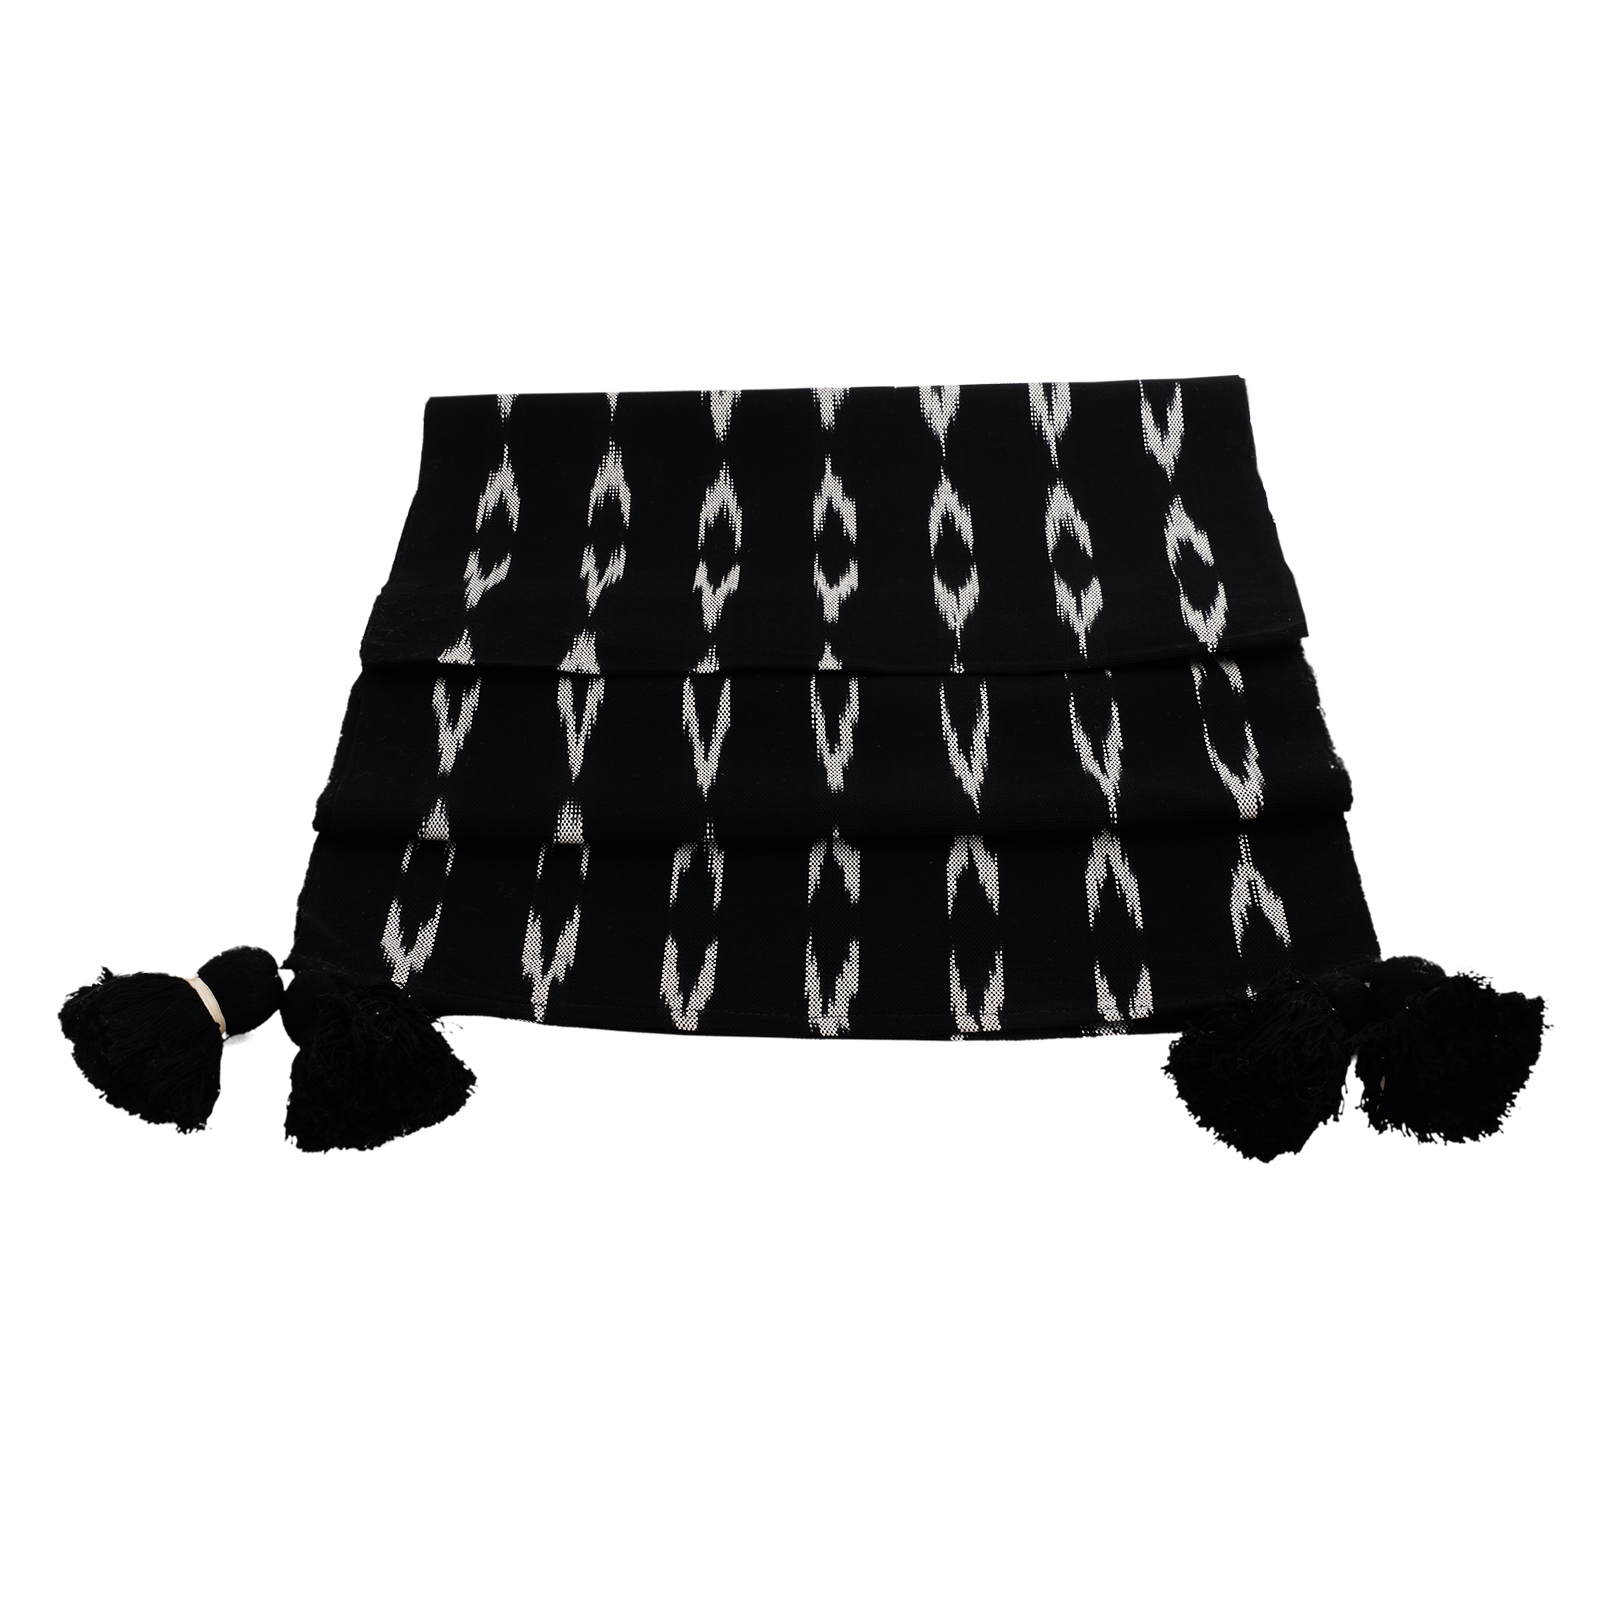 Black and White Serpentina Cotton Table Runner